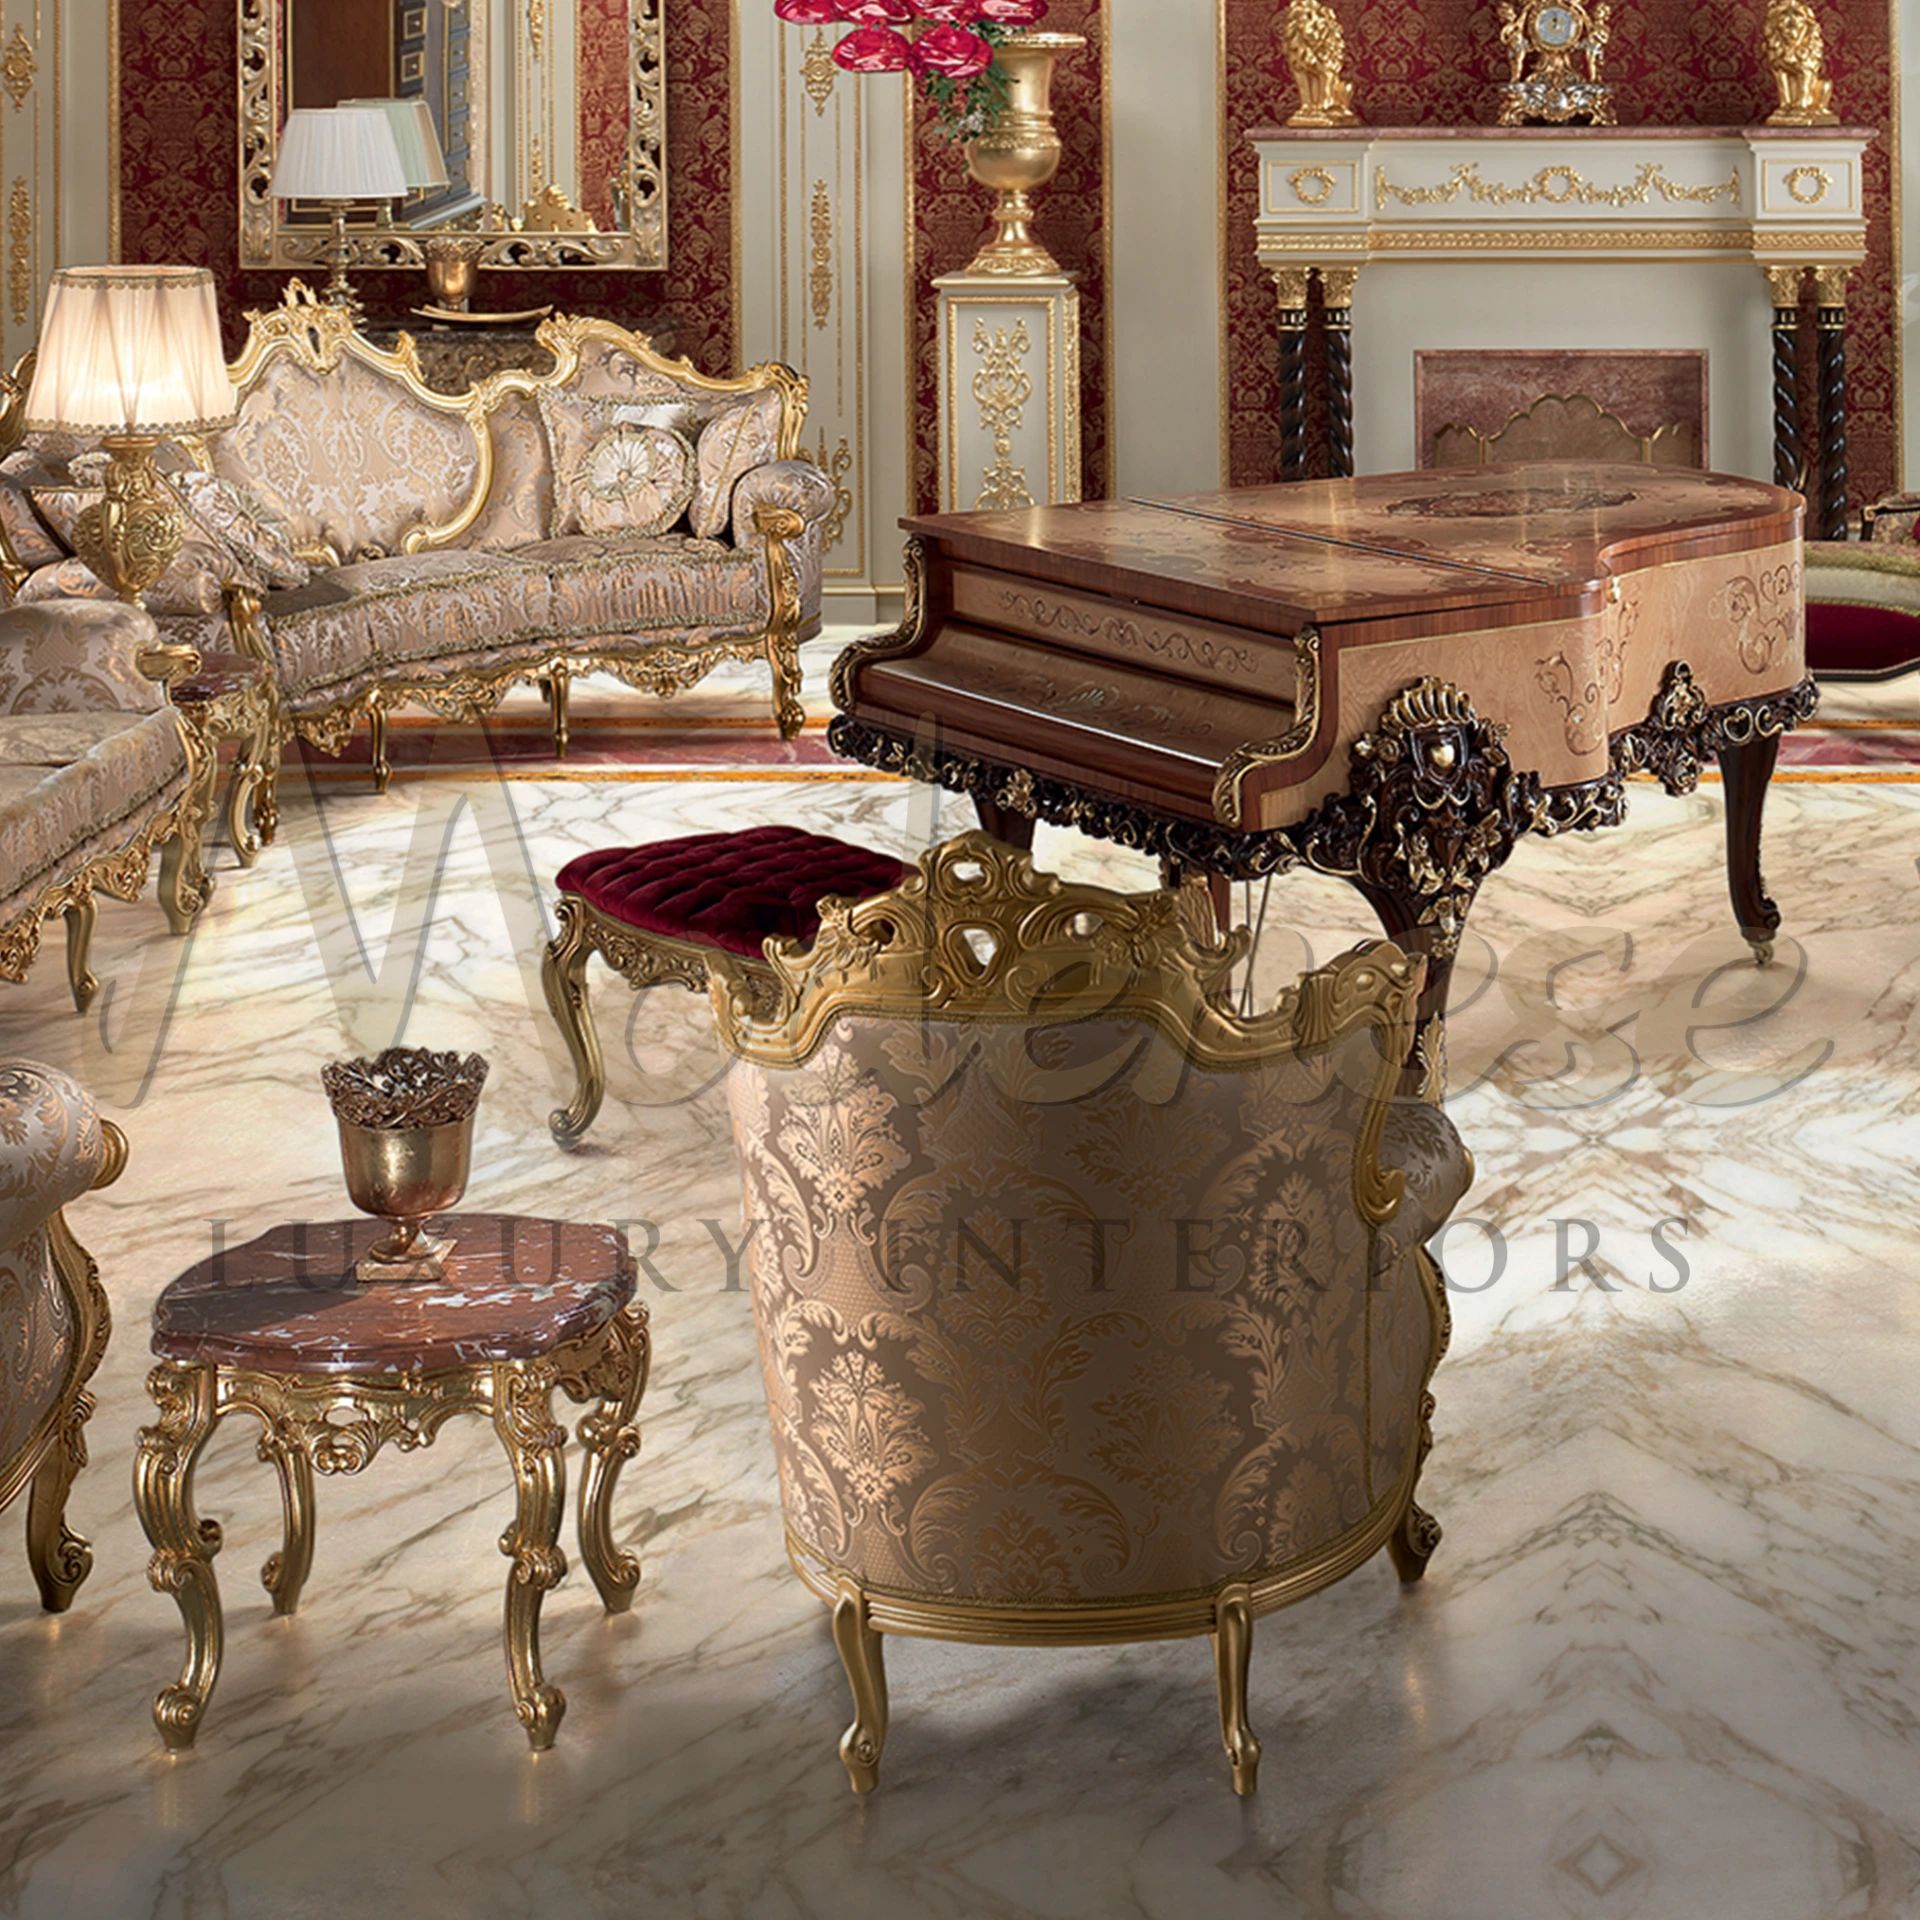 Exquisite Baroque Grand Piano with unparalleled attention to detail, ideal for adding elegance to royal palace living rooms.